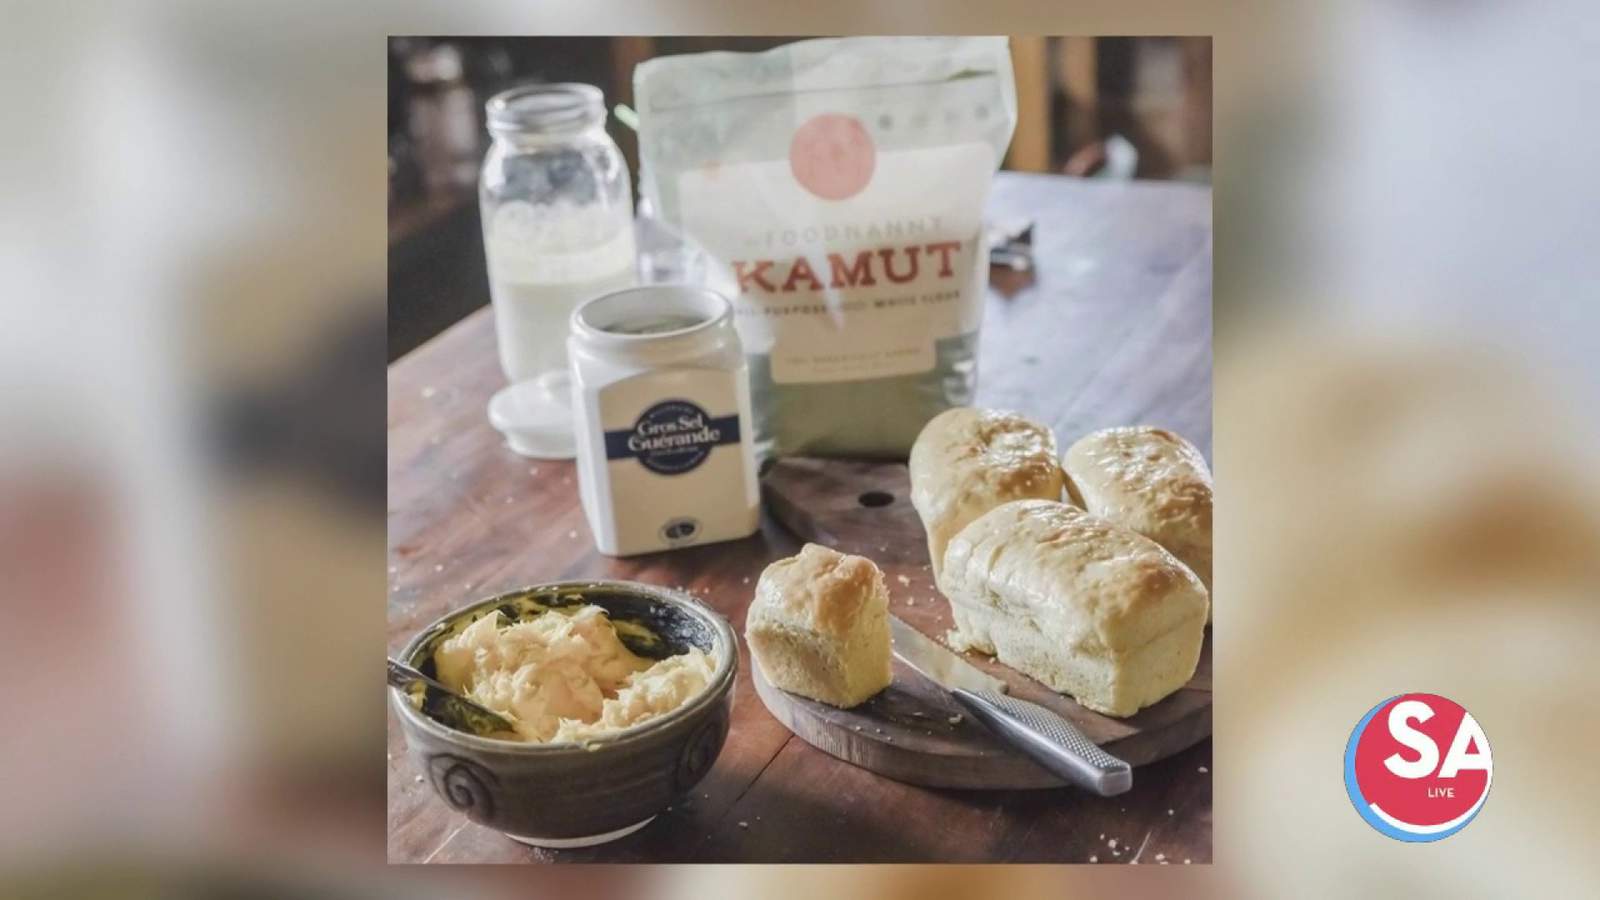 The Food Nanny shares her love for Kamut flour